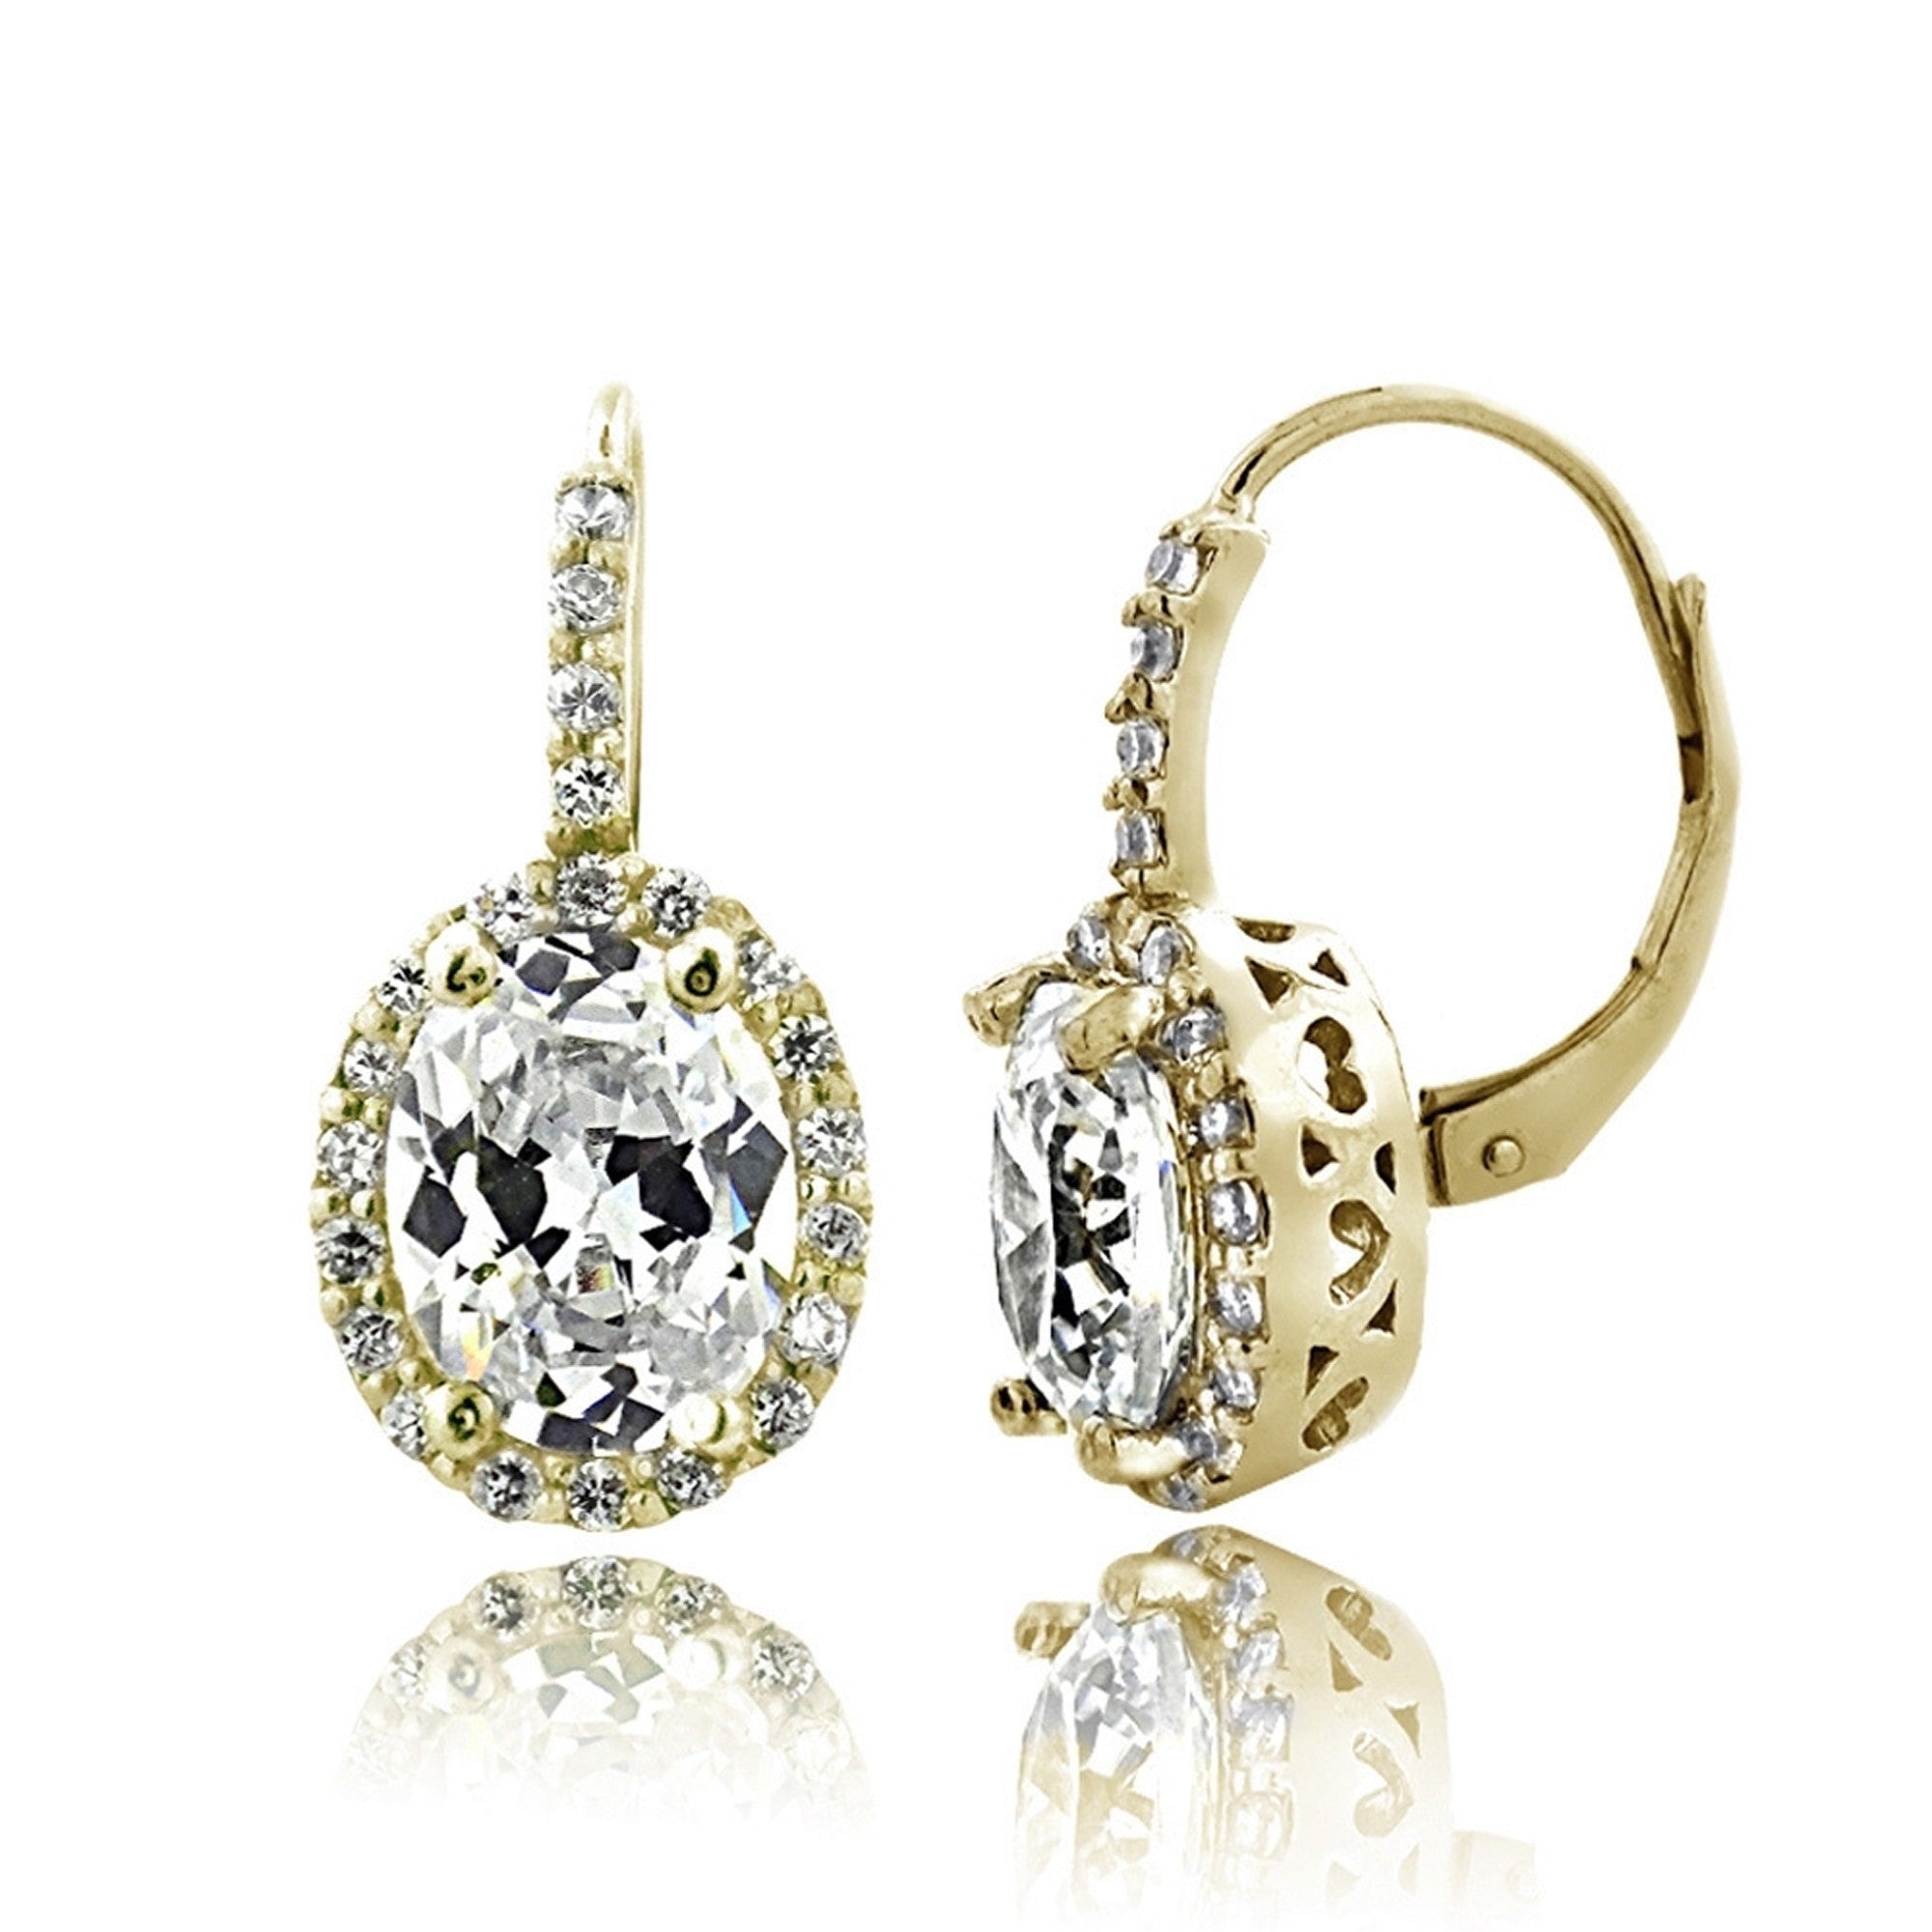 Oval Cubic Zirconia Halo Leverback Earrings - Gold Tone